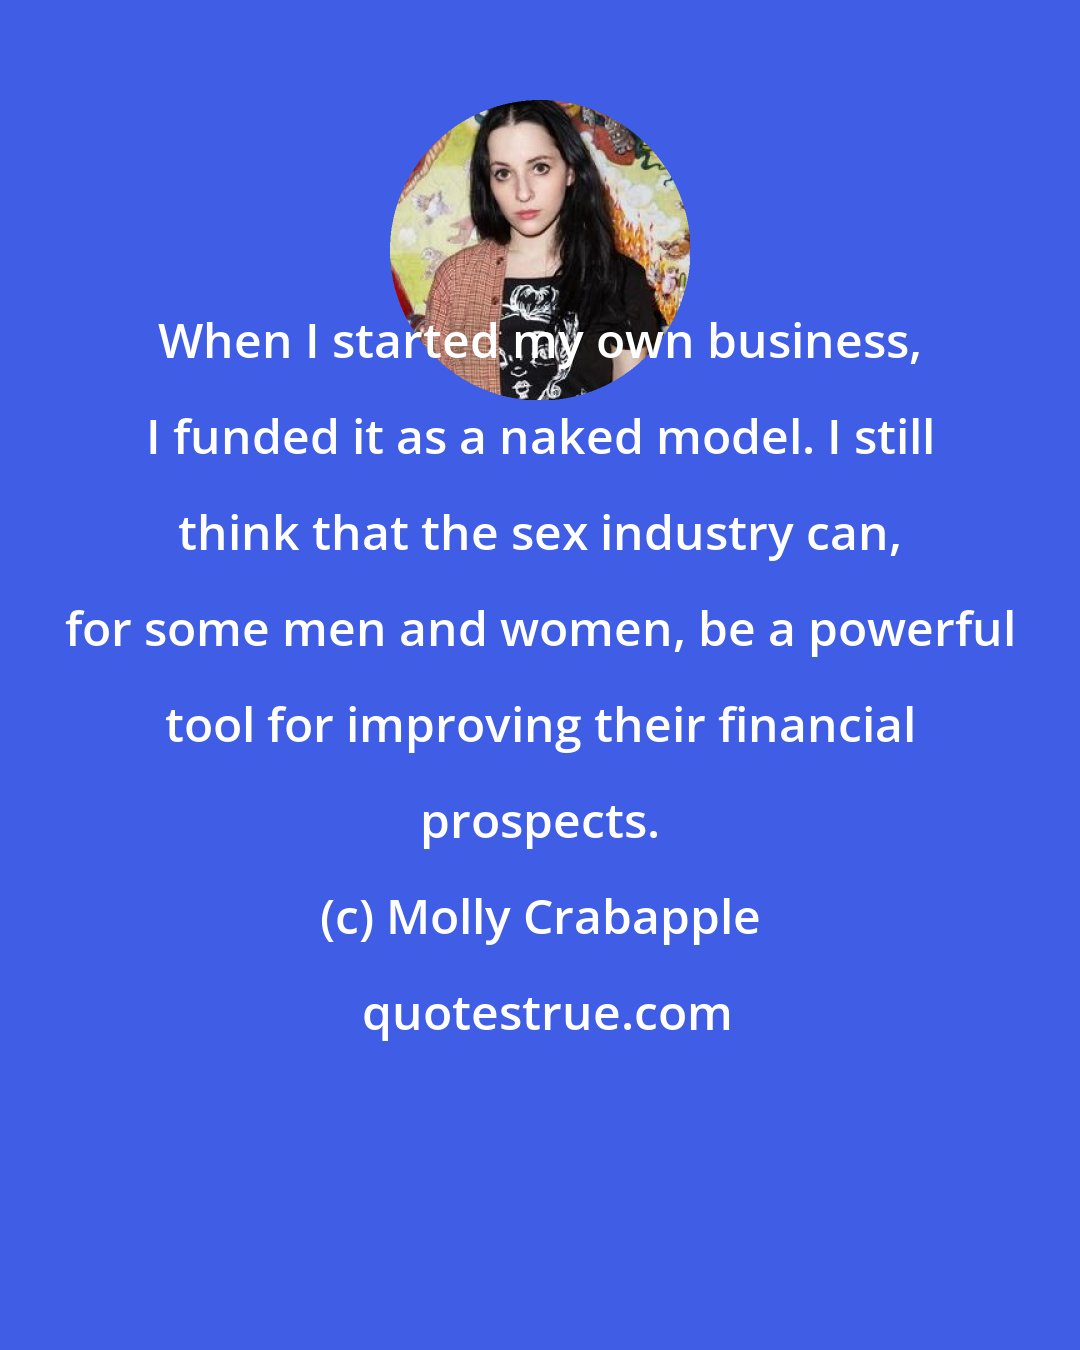 Molly Crabapple: When I started my own business, I funded it as a naked model. I still think that the sex industry can, for some men and women, be a powerful tool for improving their financial prospects.